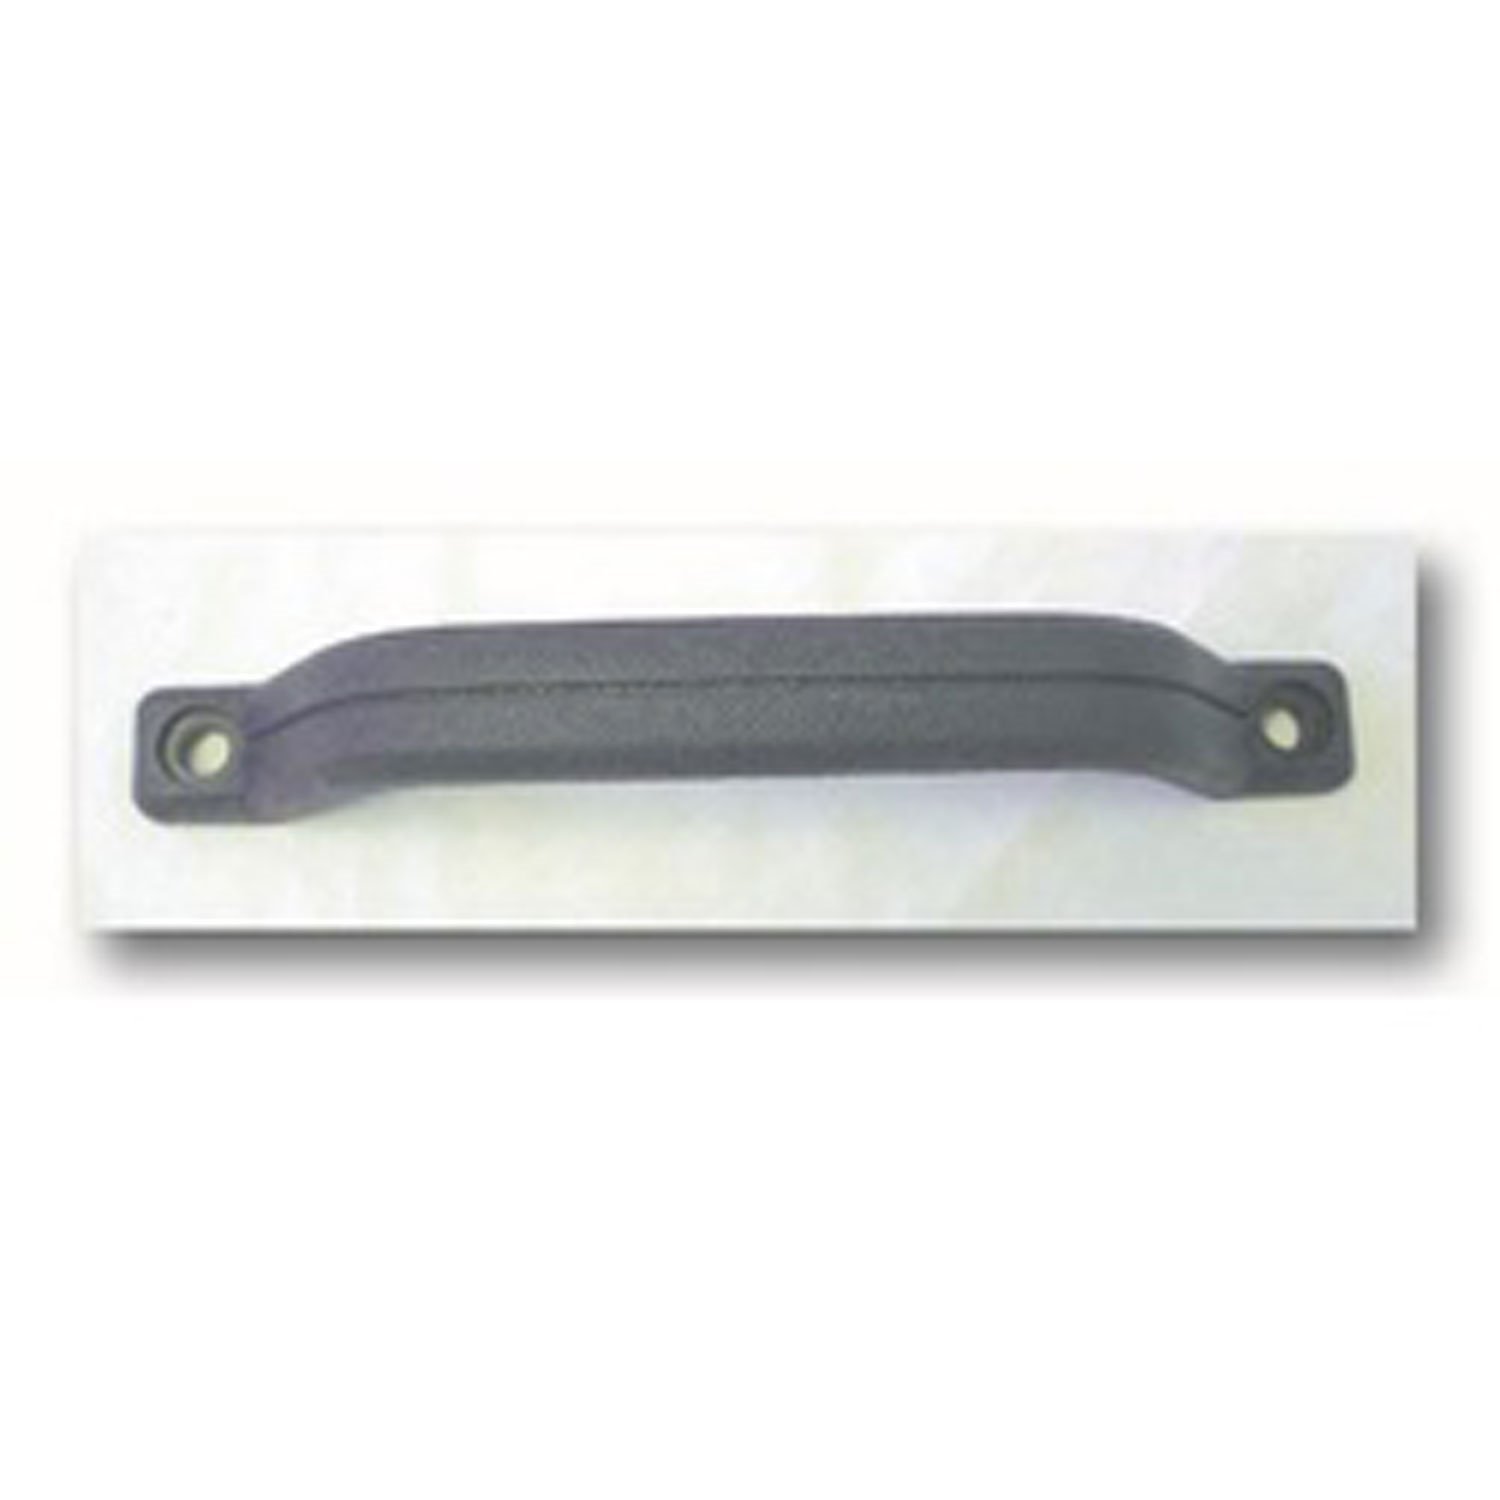 This original-style black door handle pull from Omix-ADA fits factory full hard doors. Fits 76-86 Je